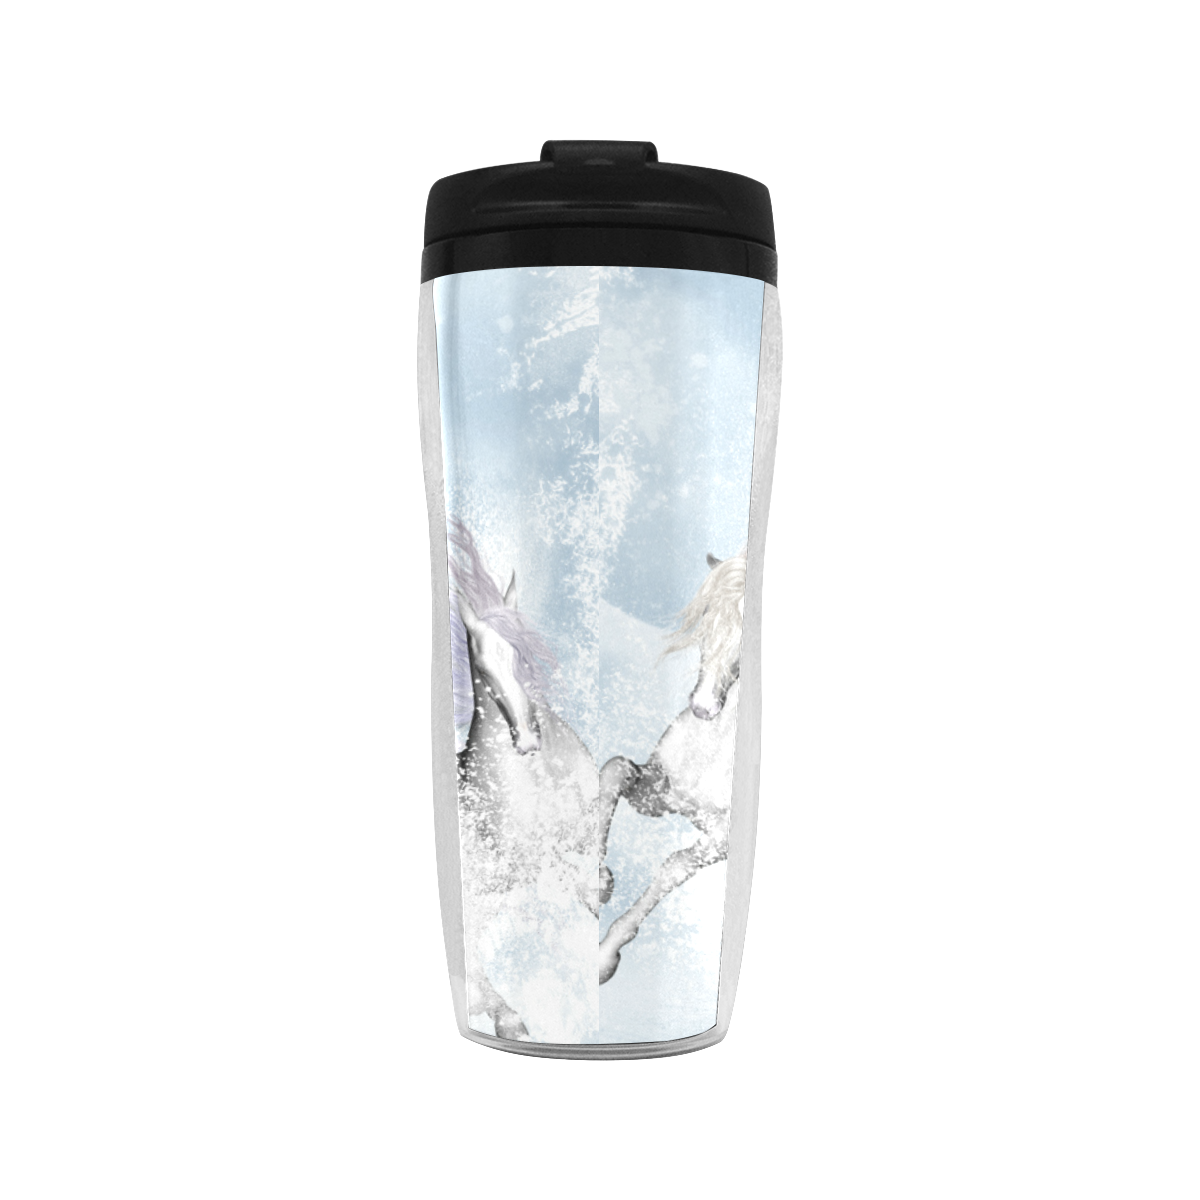 Awesome white wild horses Reusable Coffee Cup (11.8oz)